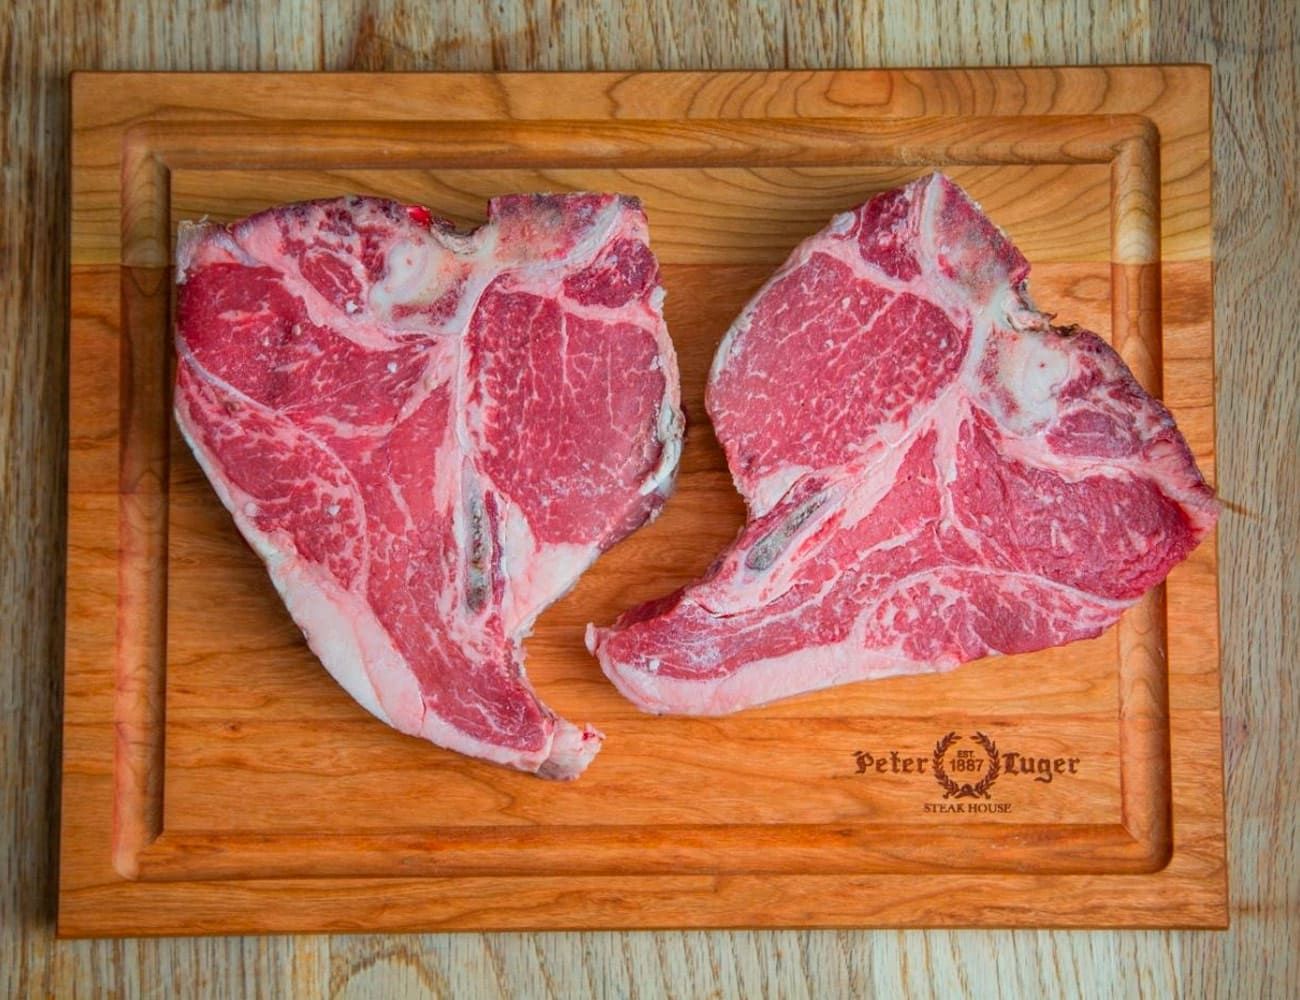 The 10 Best Meat Companies  Where to Buy Steak Online ...